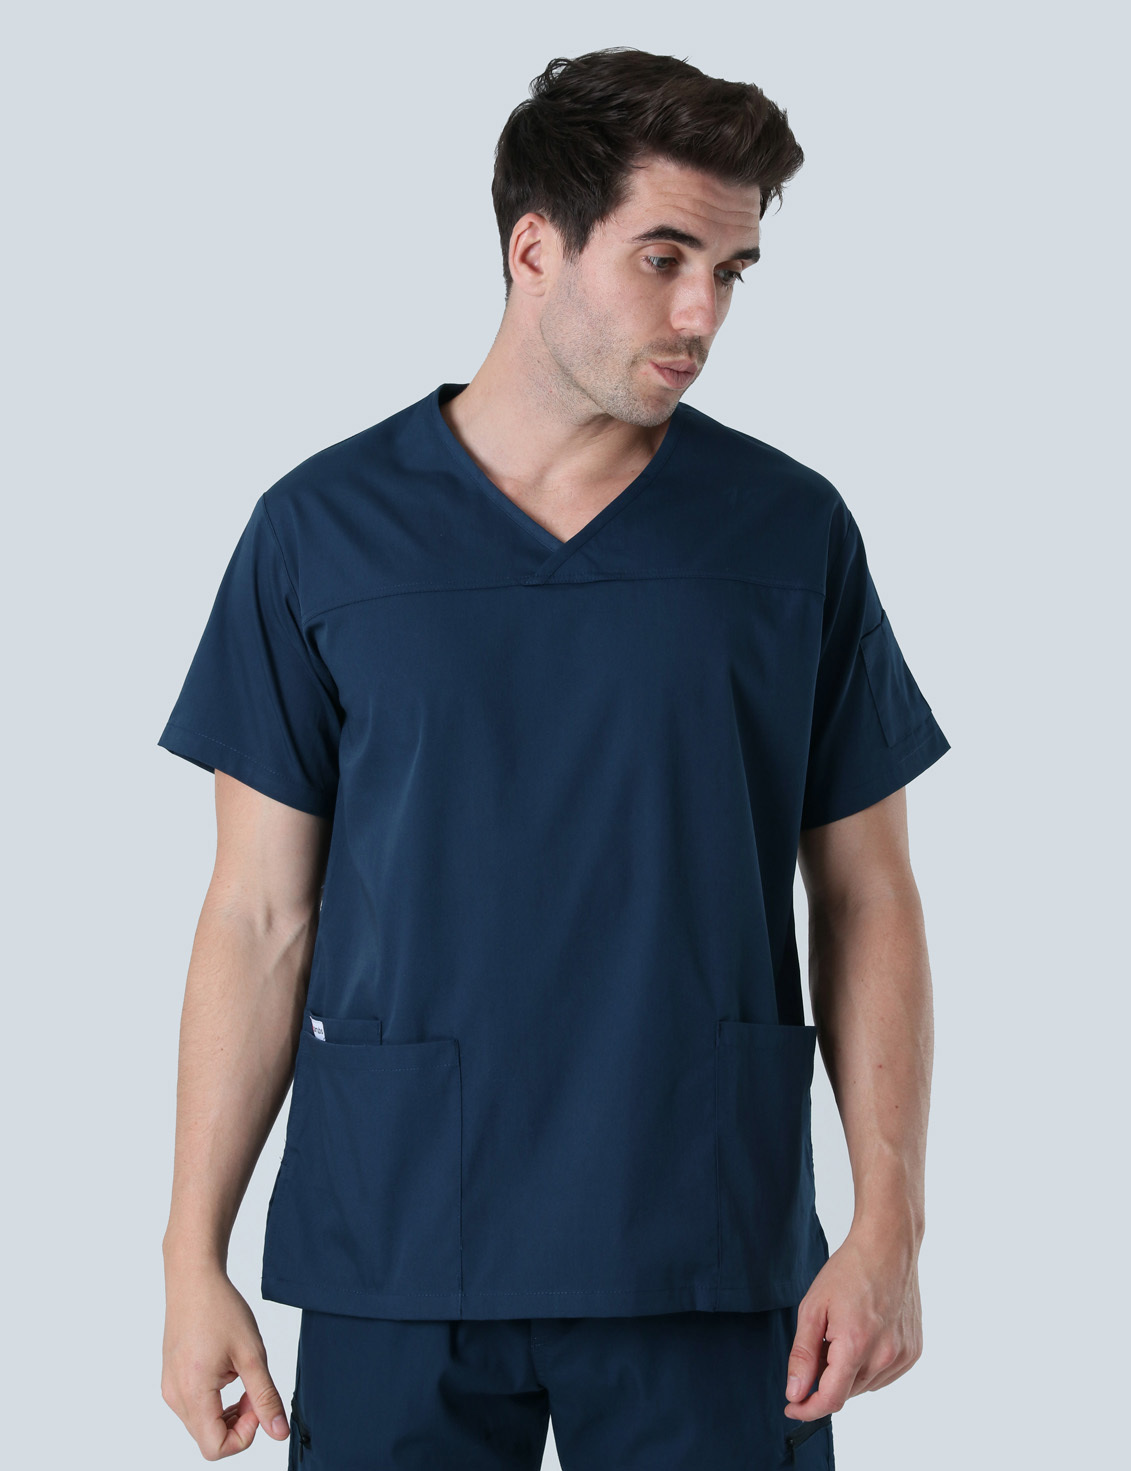 Men's Fit Solid Scrub Top - Navy - X Small